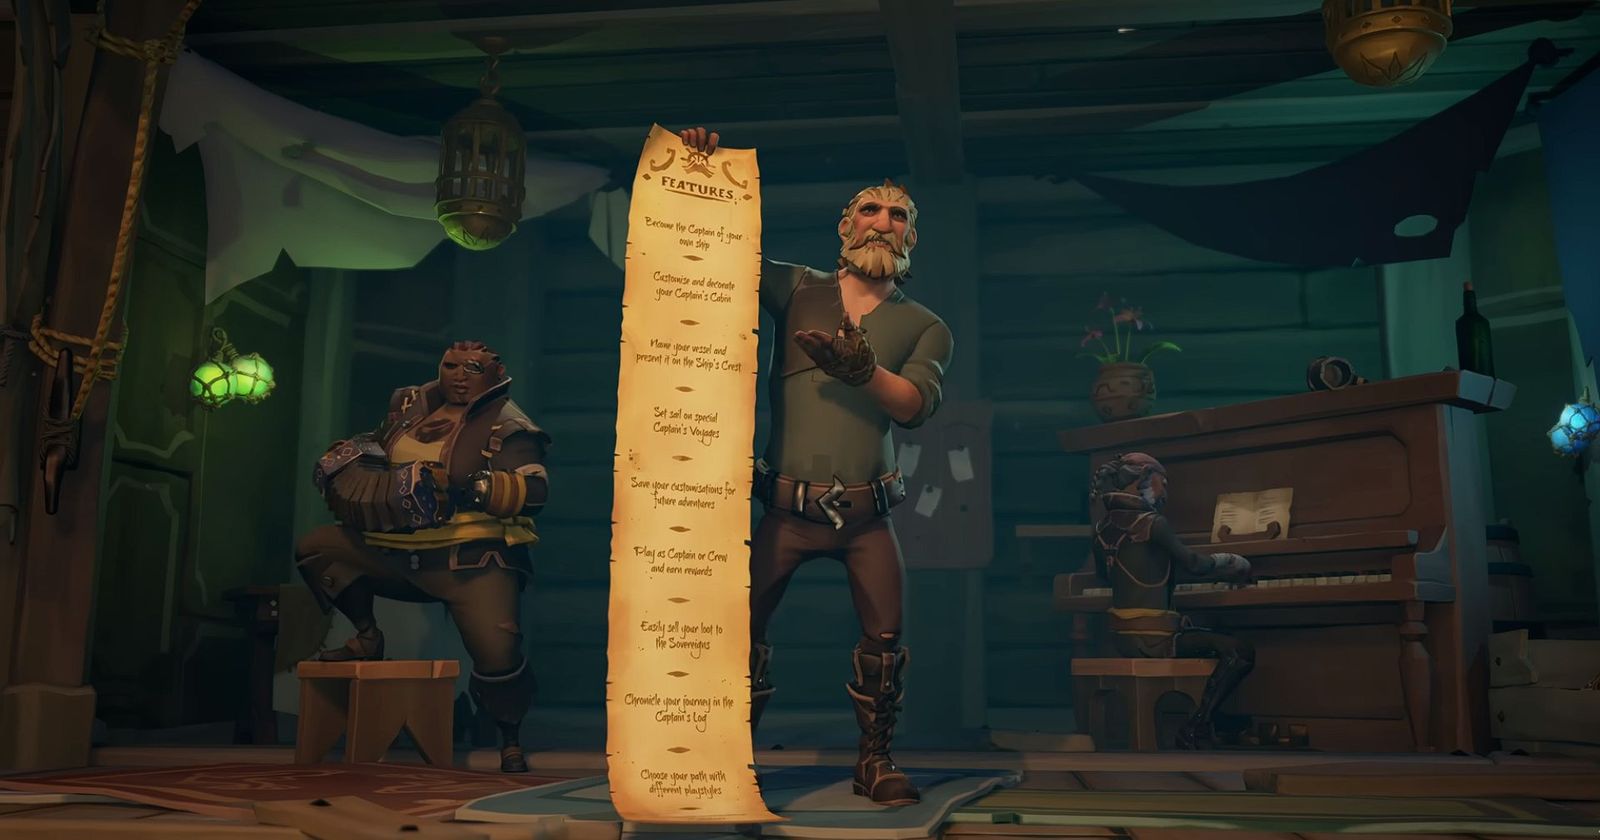 Halo items are returning to Sea of Thieves starting next week